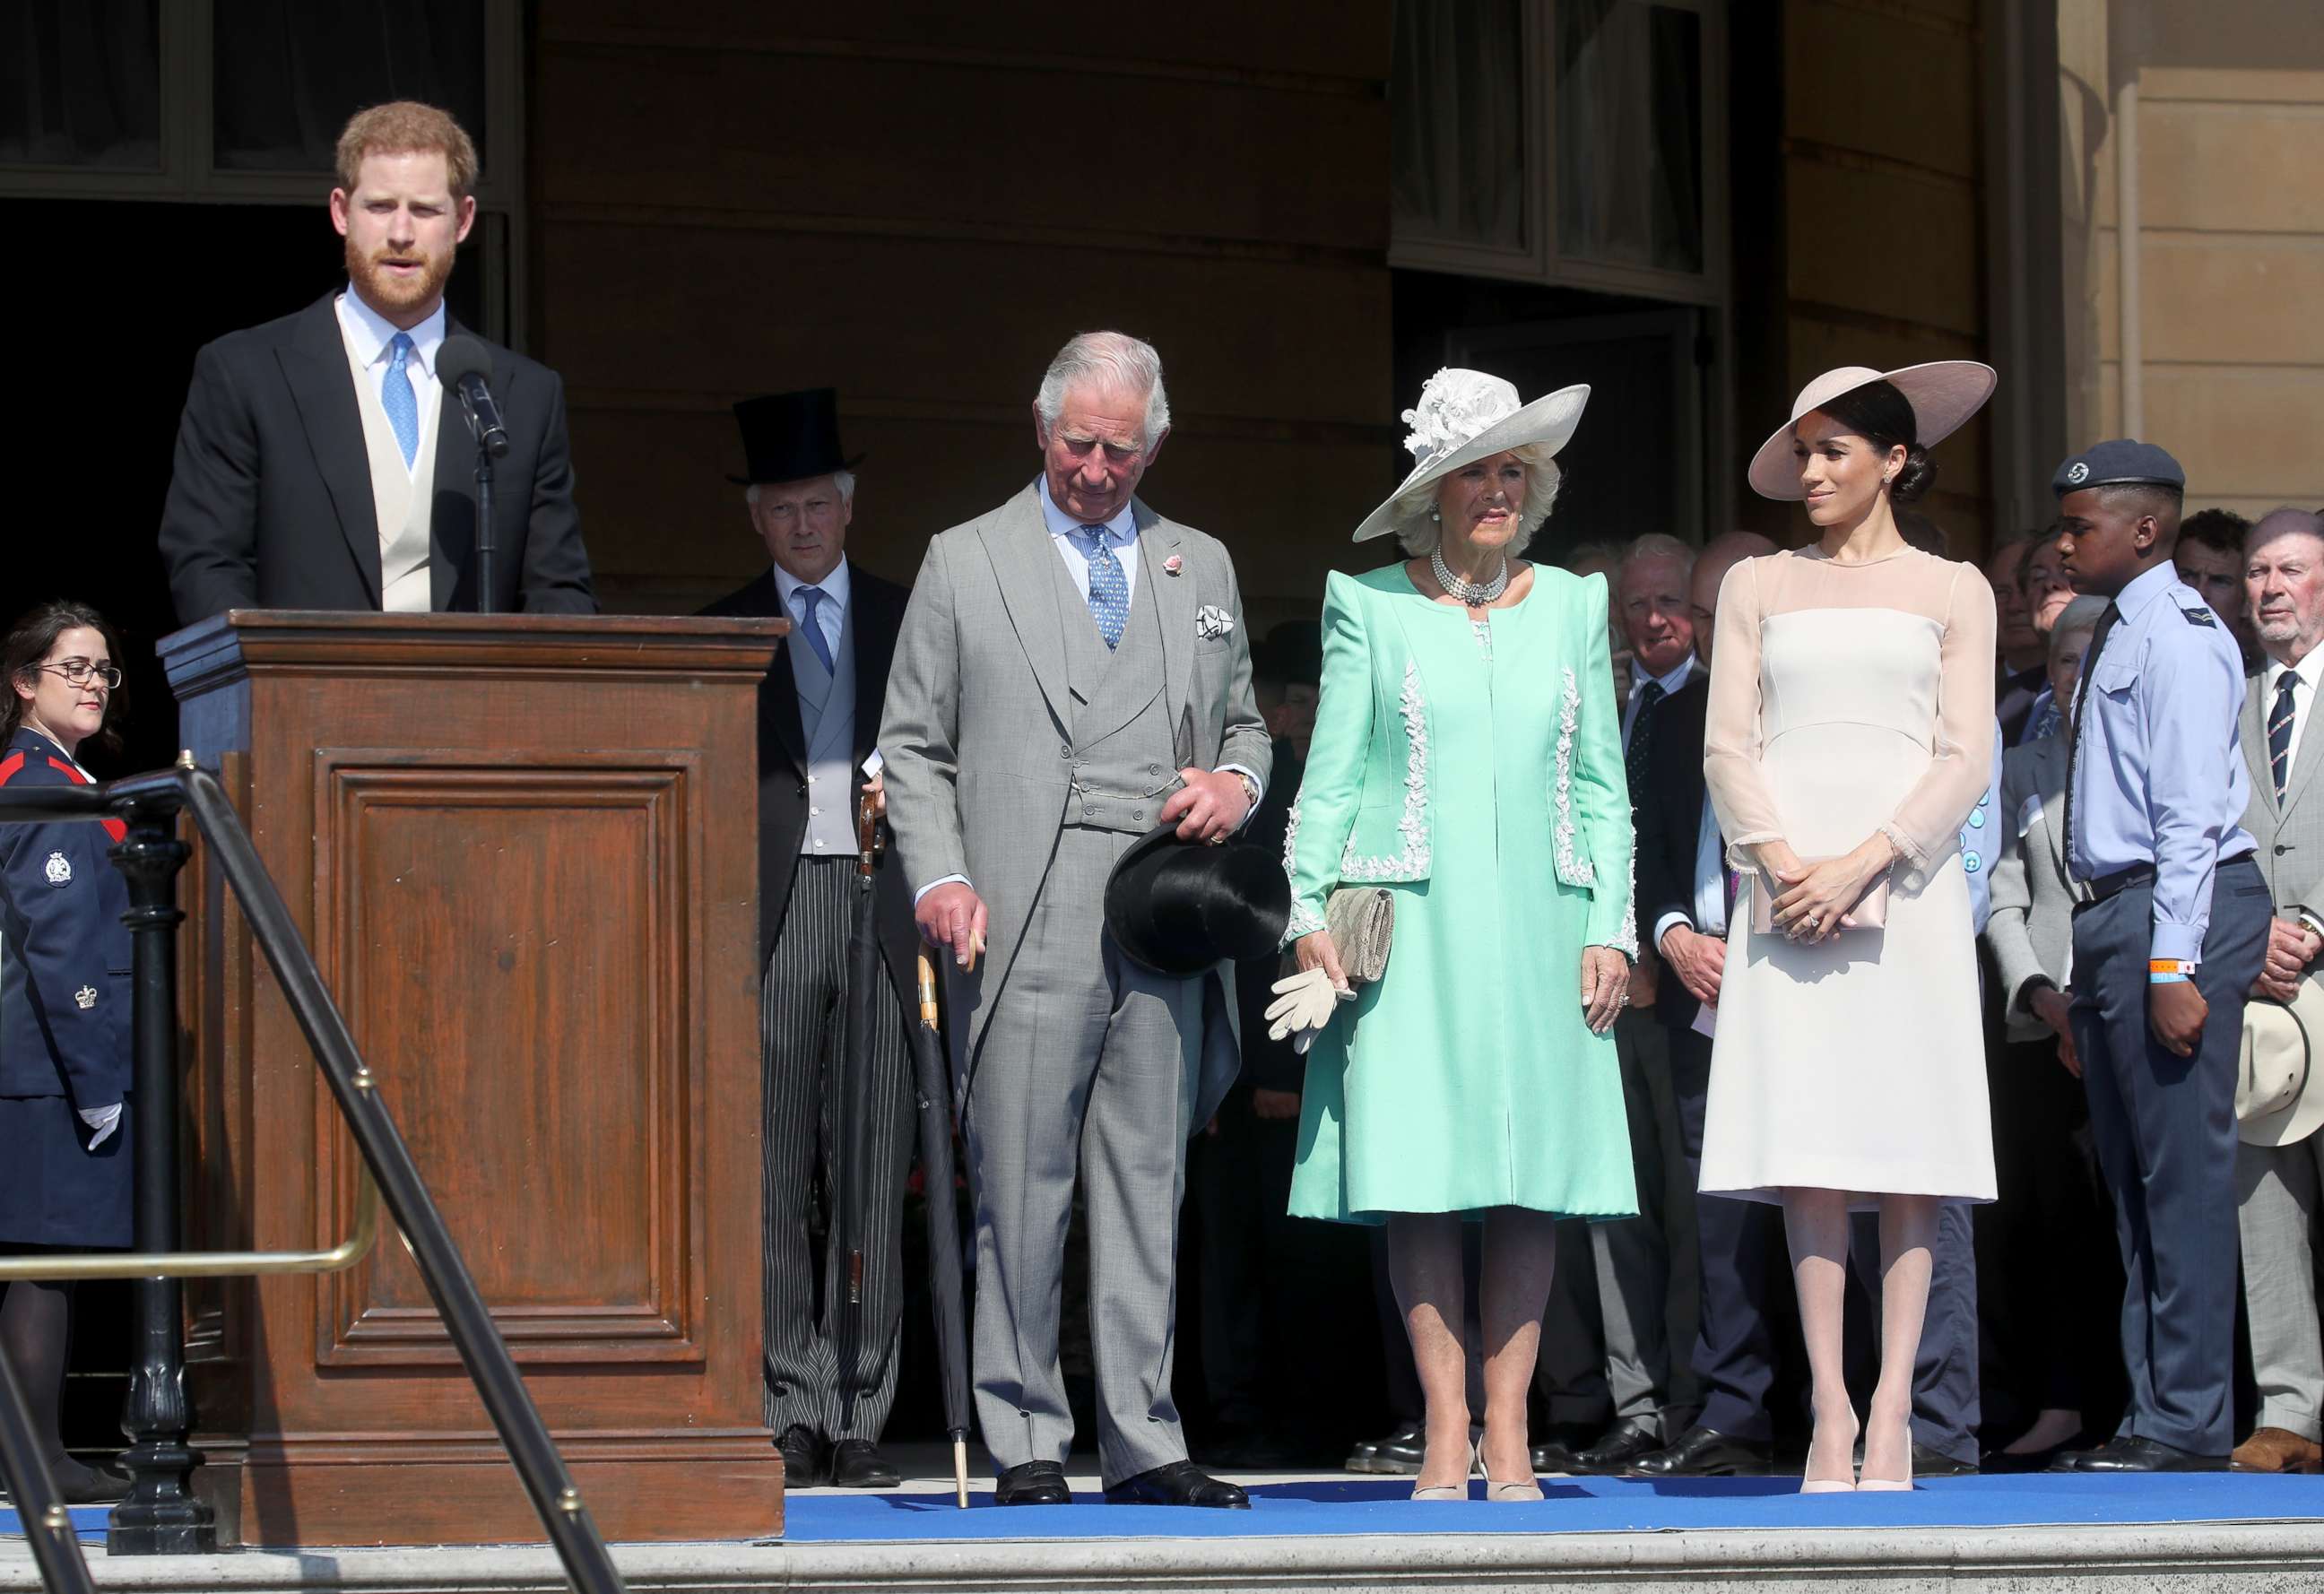 PHOTO: (L-R) Prince Harry, Duke of Sussex gives a speech next to Prince Charles, Prince of Wales, Camilla, Duchess of Cornwall and Meghan, Duchess of Sussex as they attend The Prince of Wales' 70th Birthday Patronage Celebration, May 22, 2018, in London.